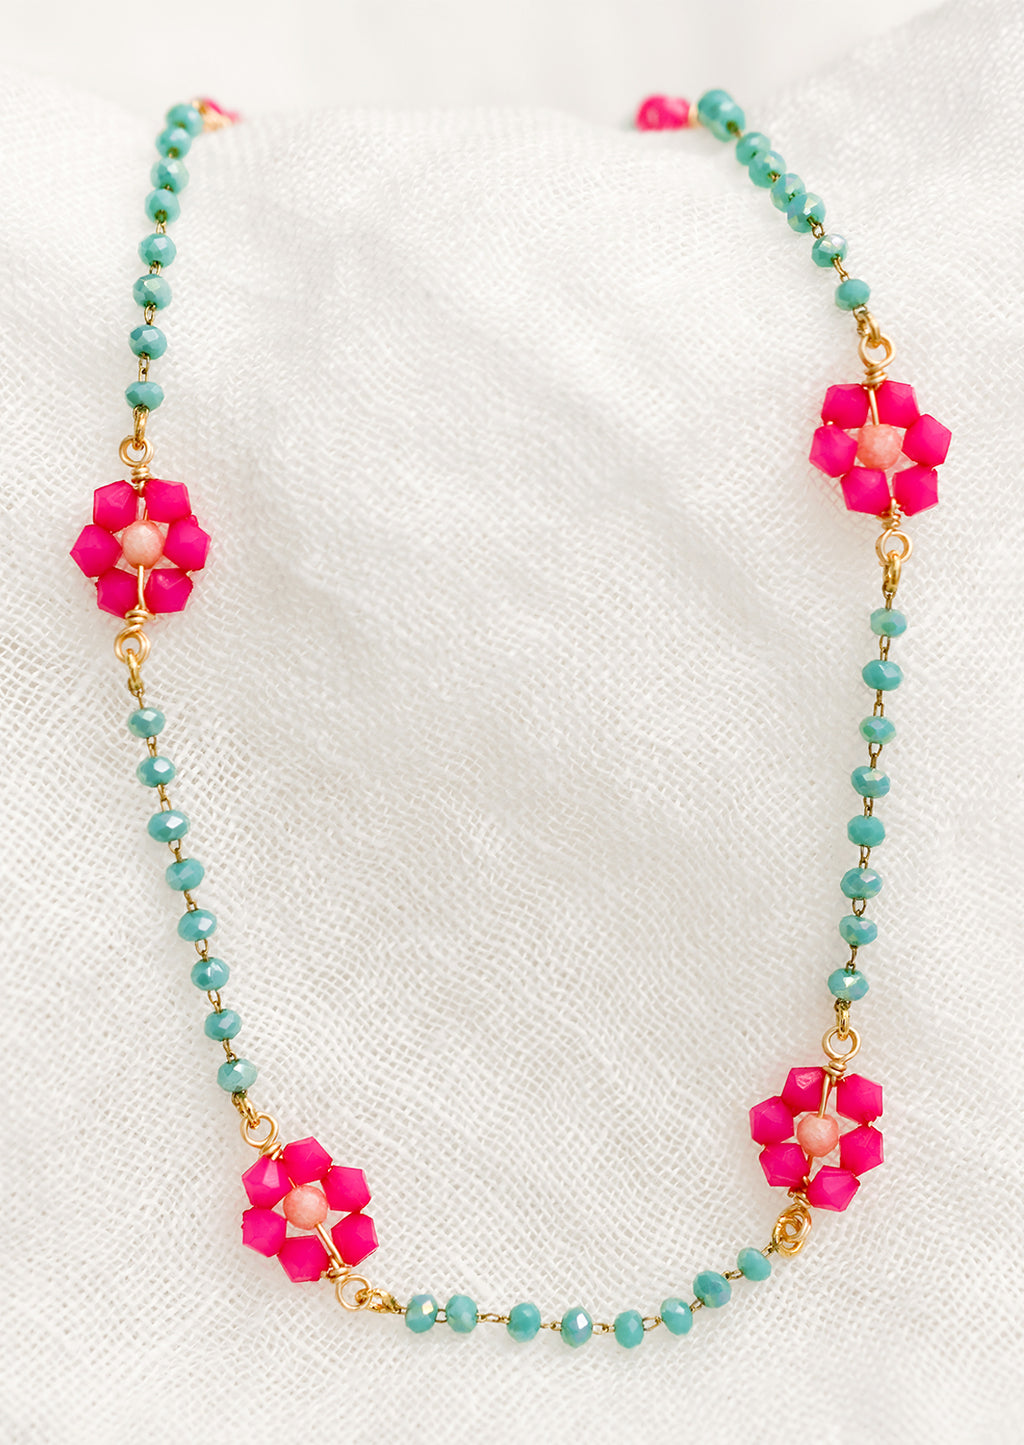 1: A beaded necklace with turquoise beads and pink flowers.